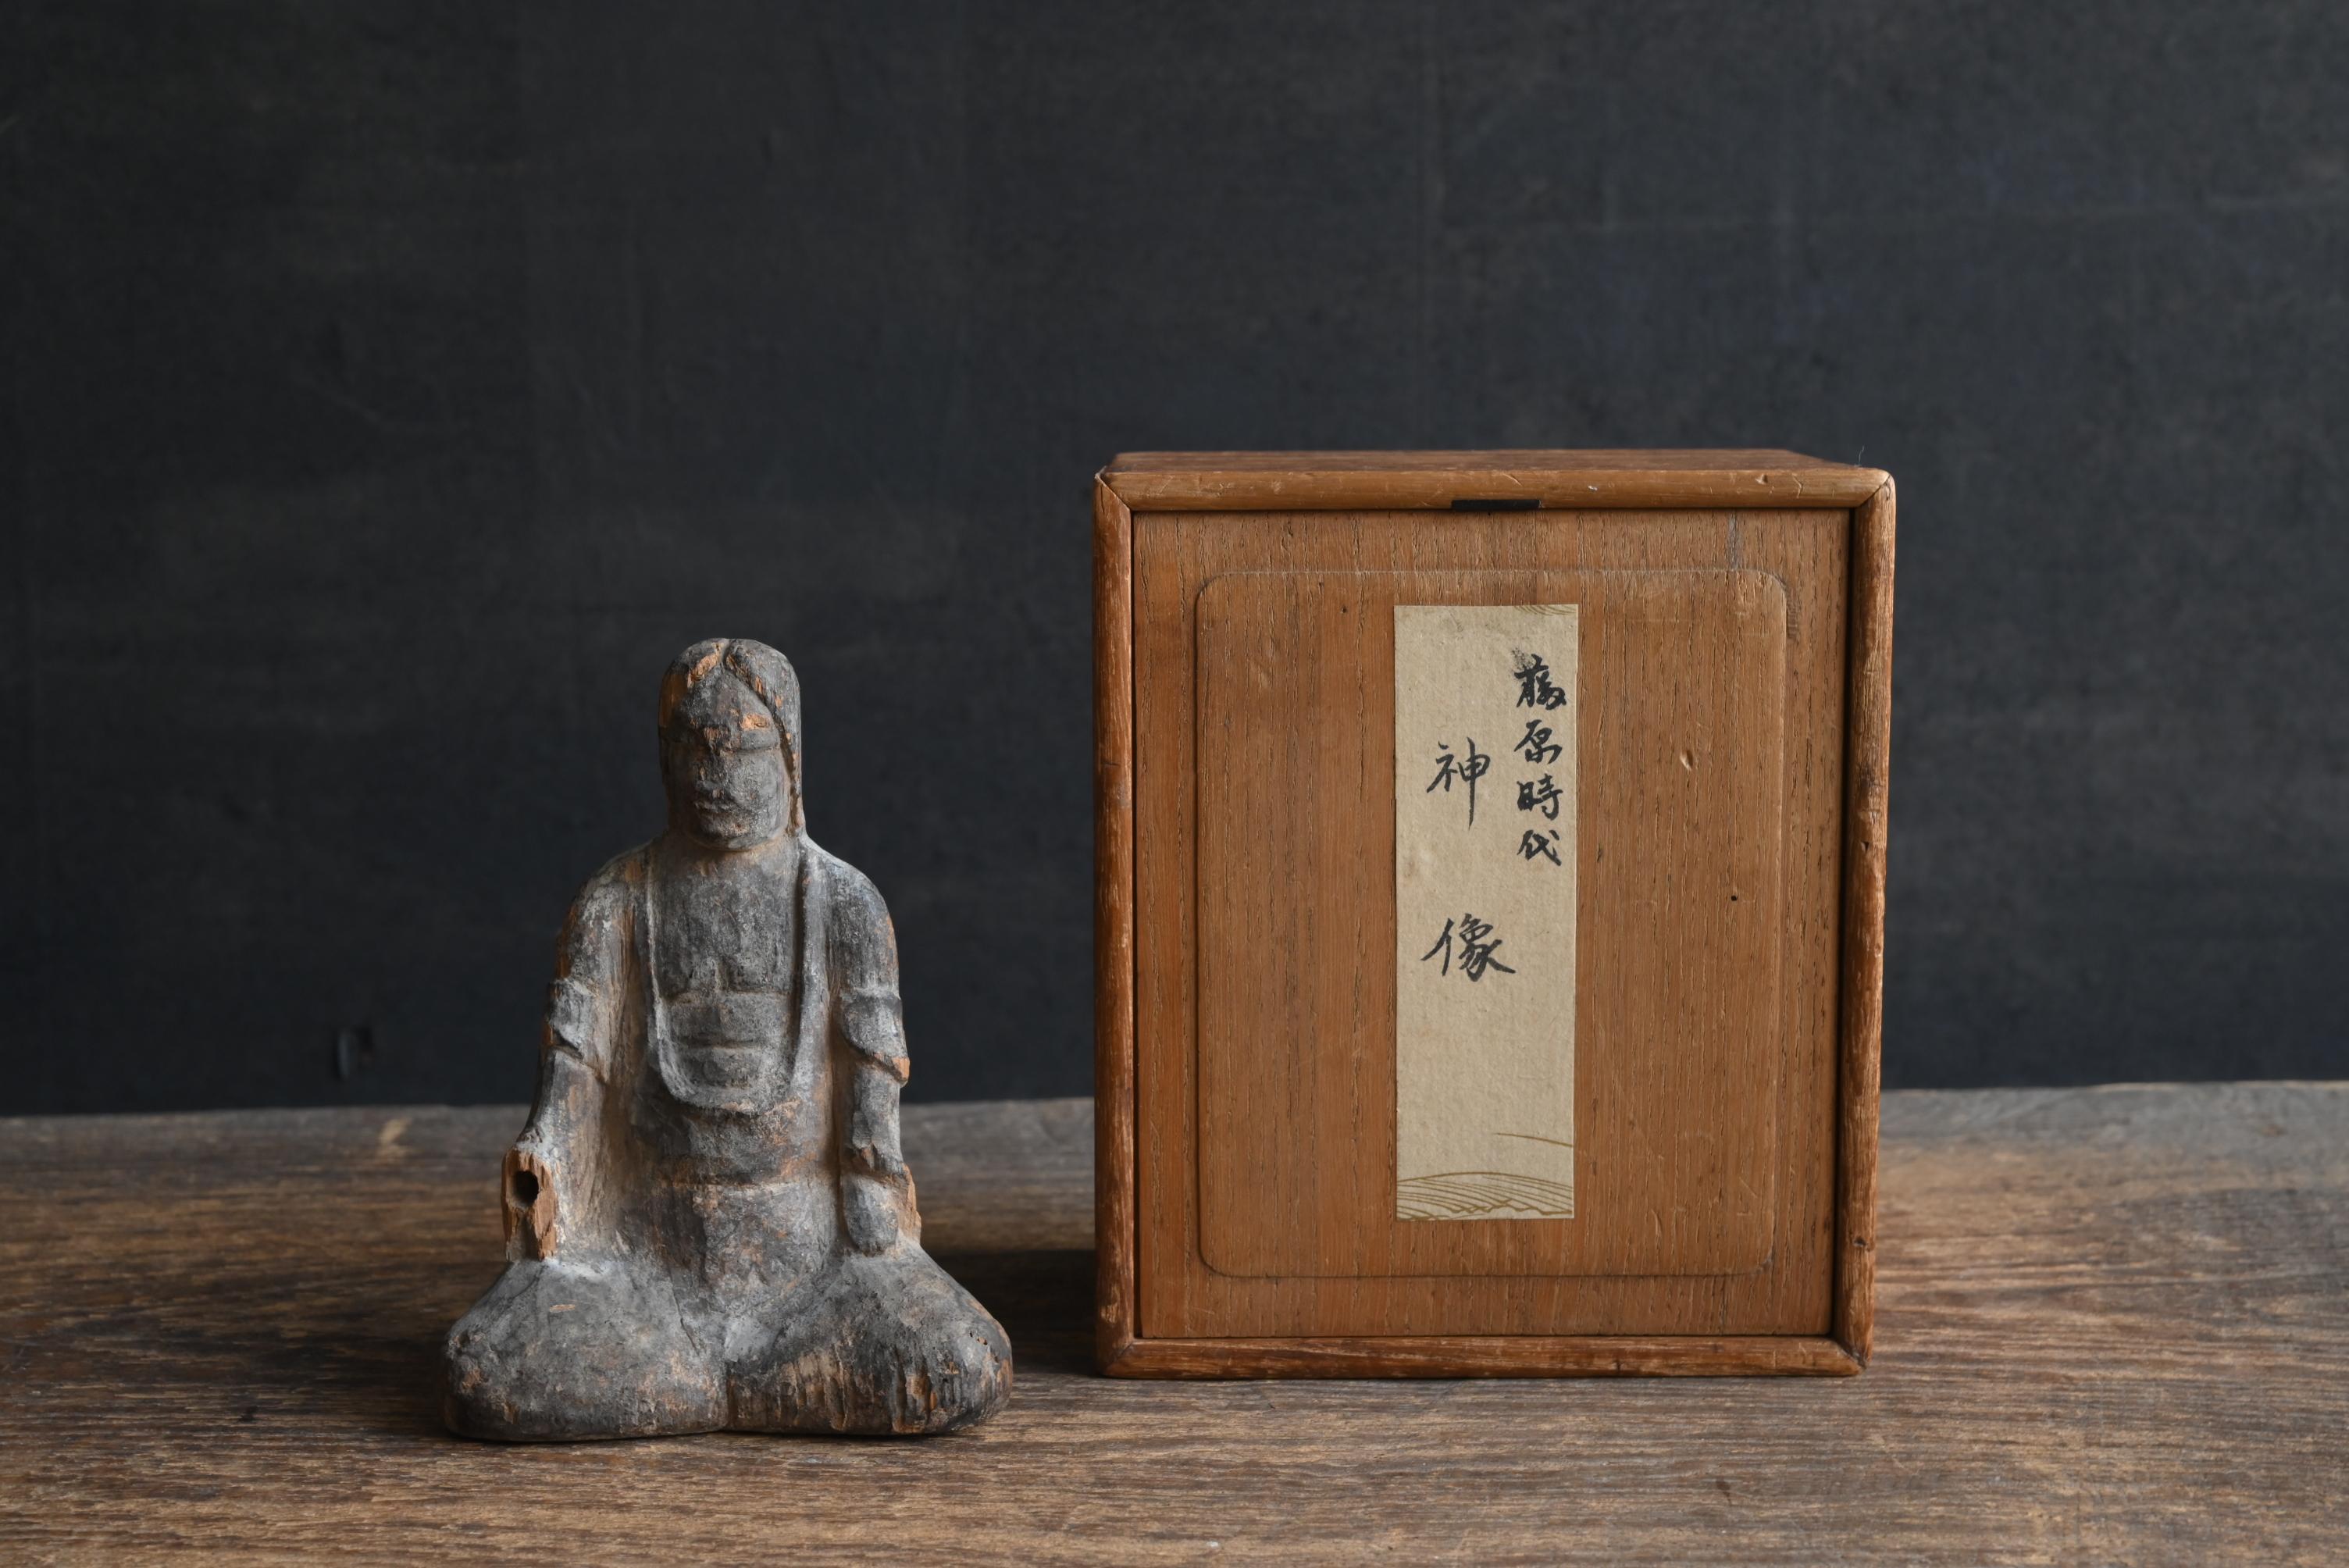 Cypress Rare Japanese antique wooden god statue /12th century/small wabi-sabi figurines For Sale